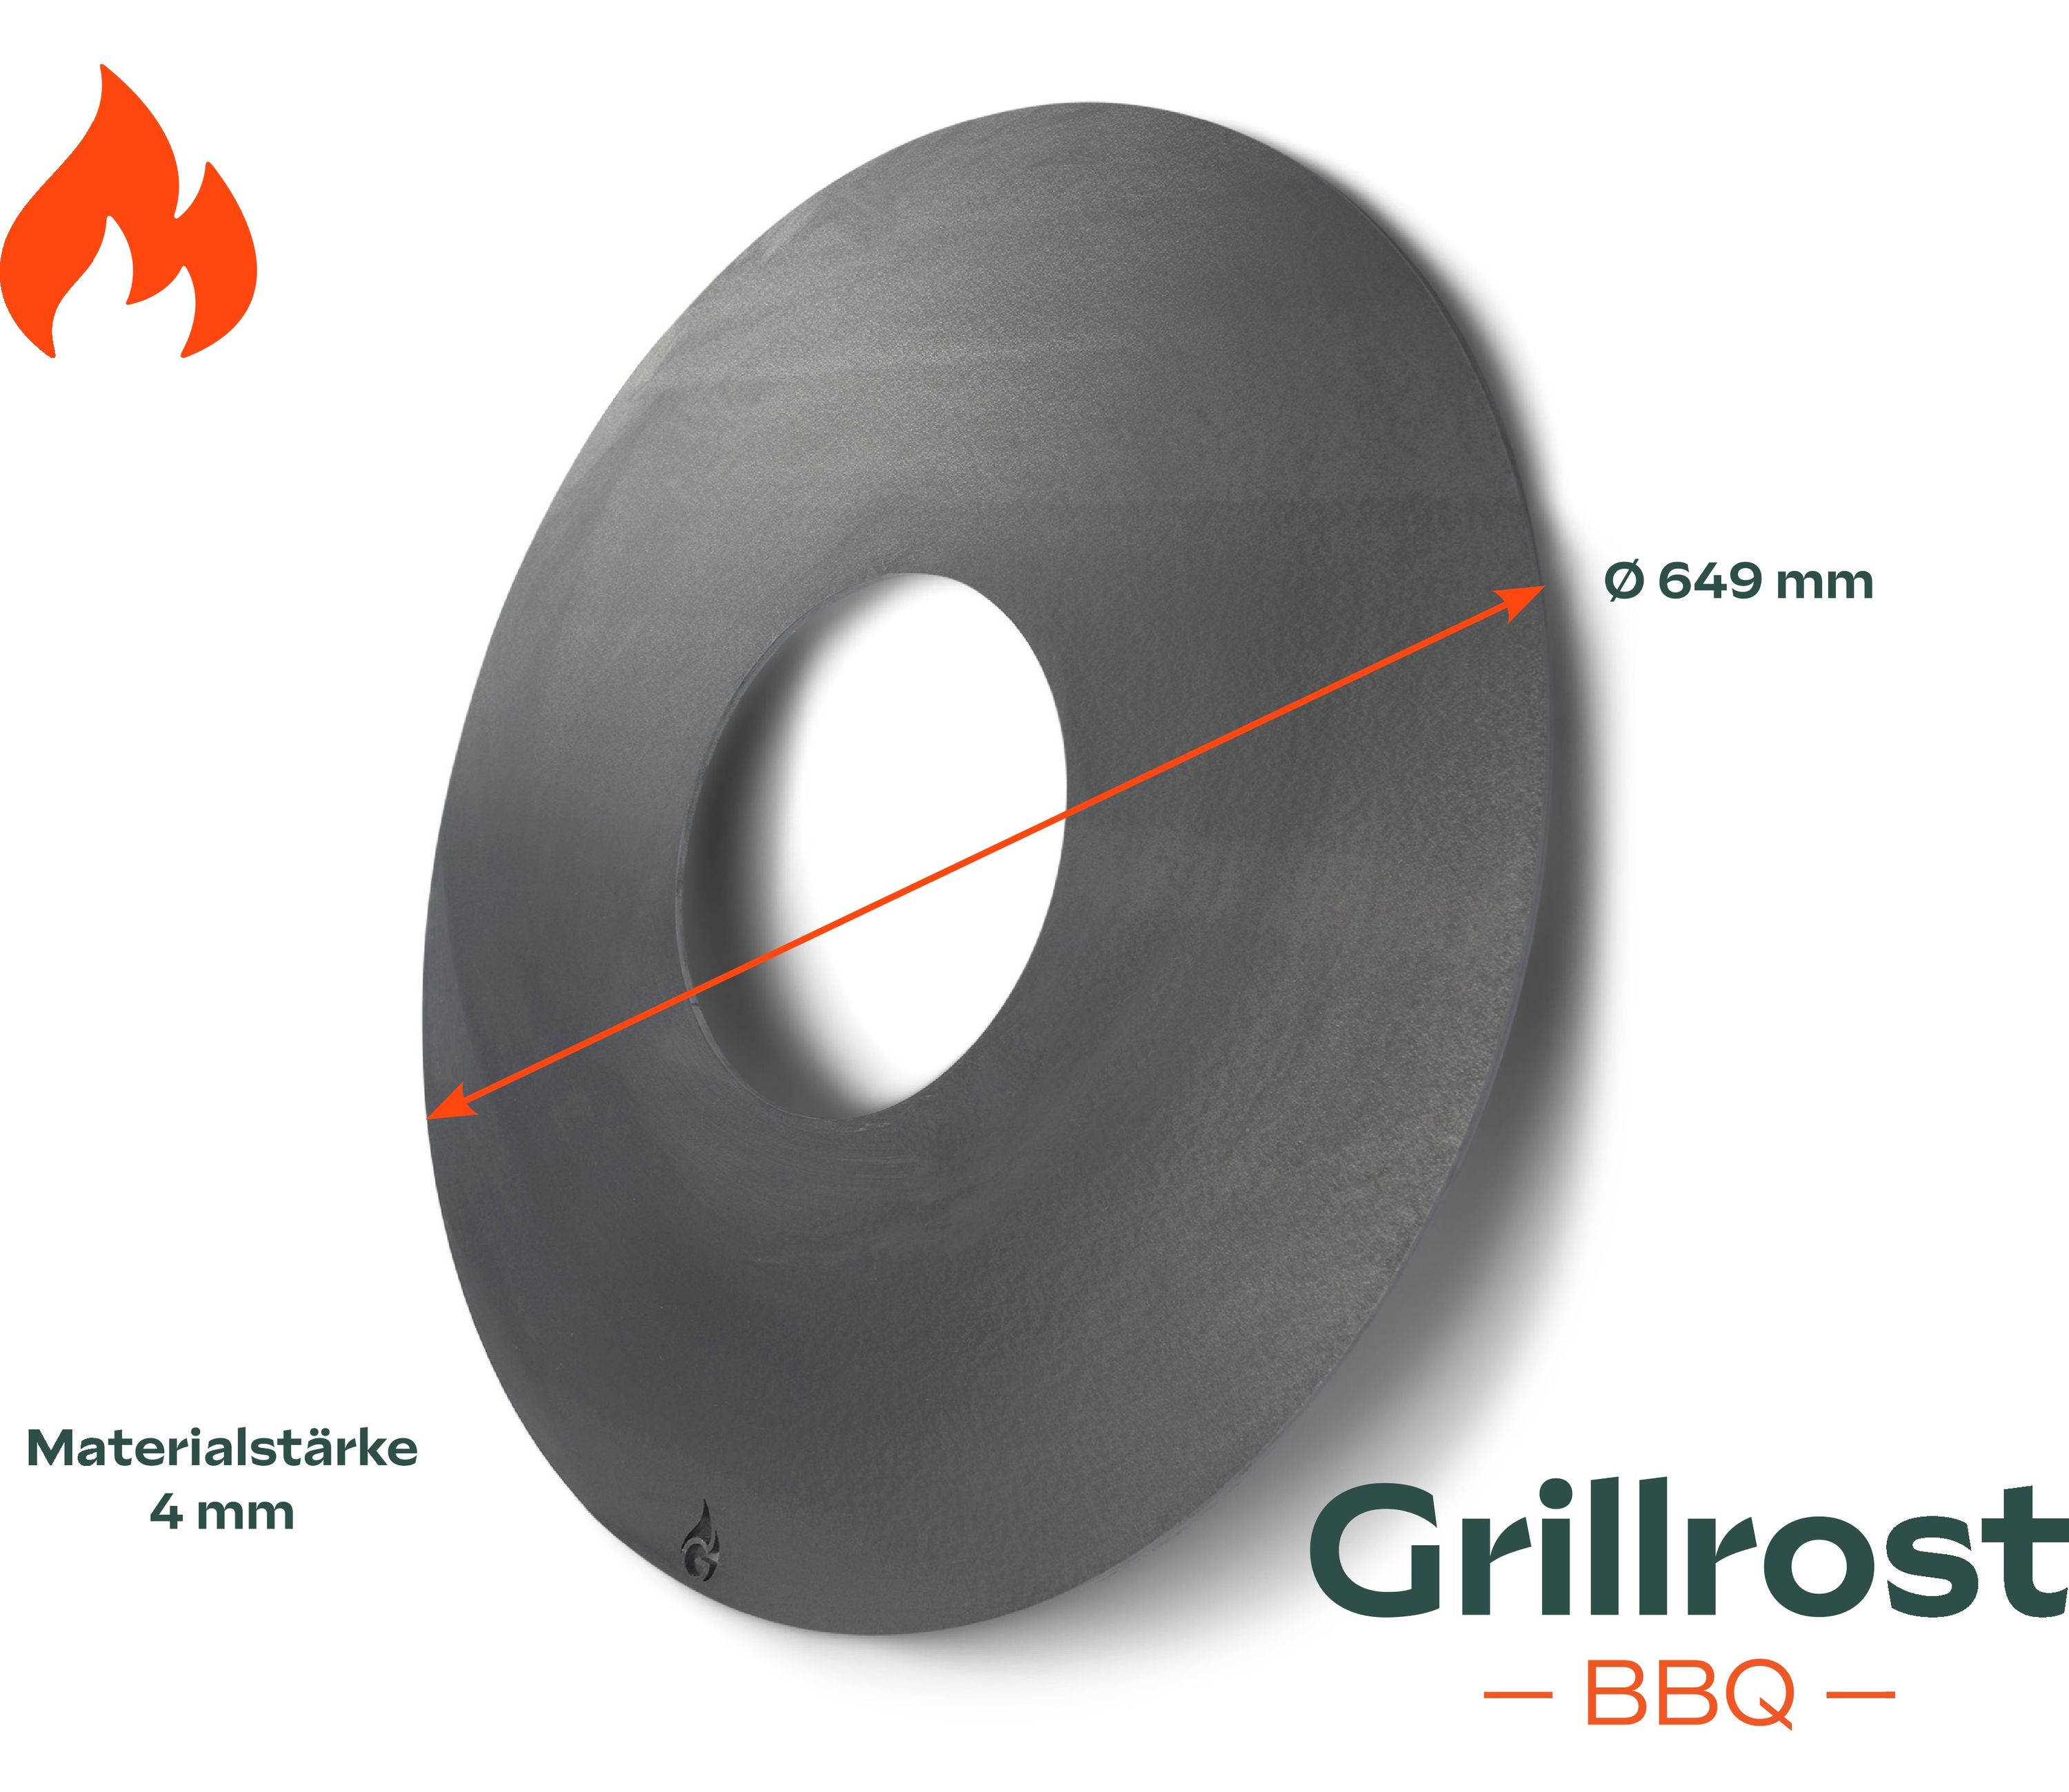 Fire plate 67s Solid grill plate for 67 ball grills